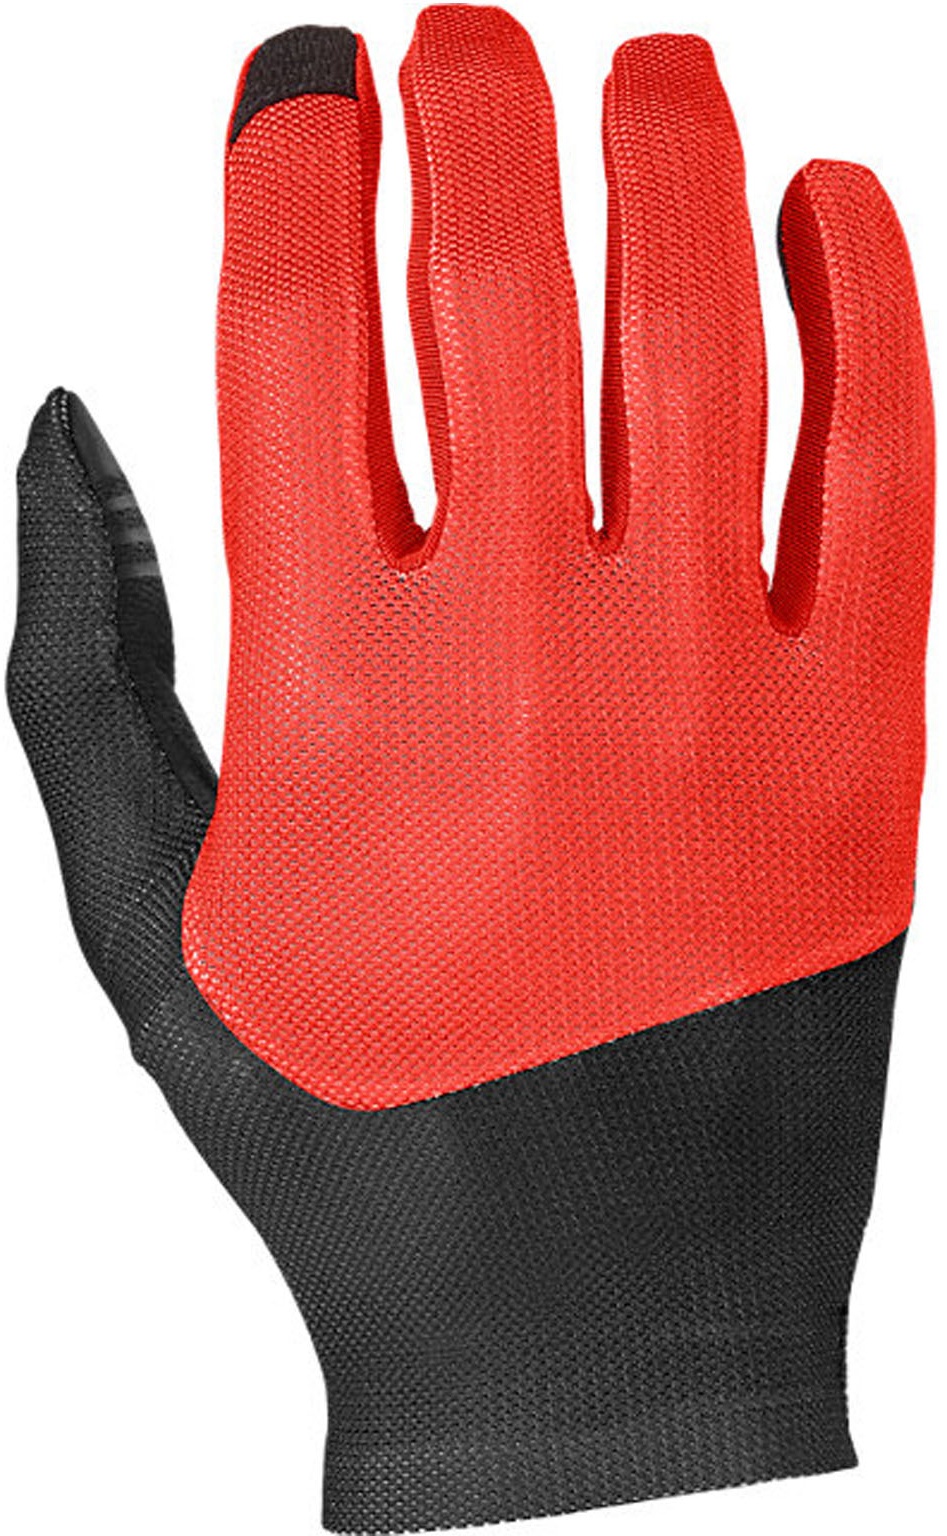 Specialized Renegade Handschuhe langfinger | flo red - M